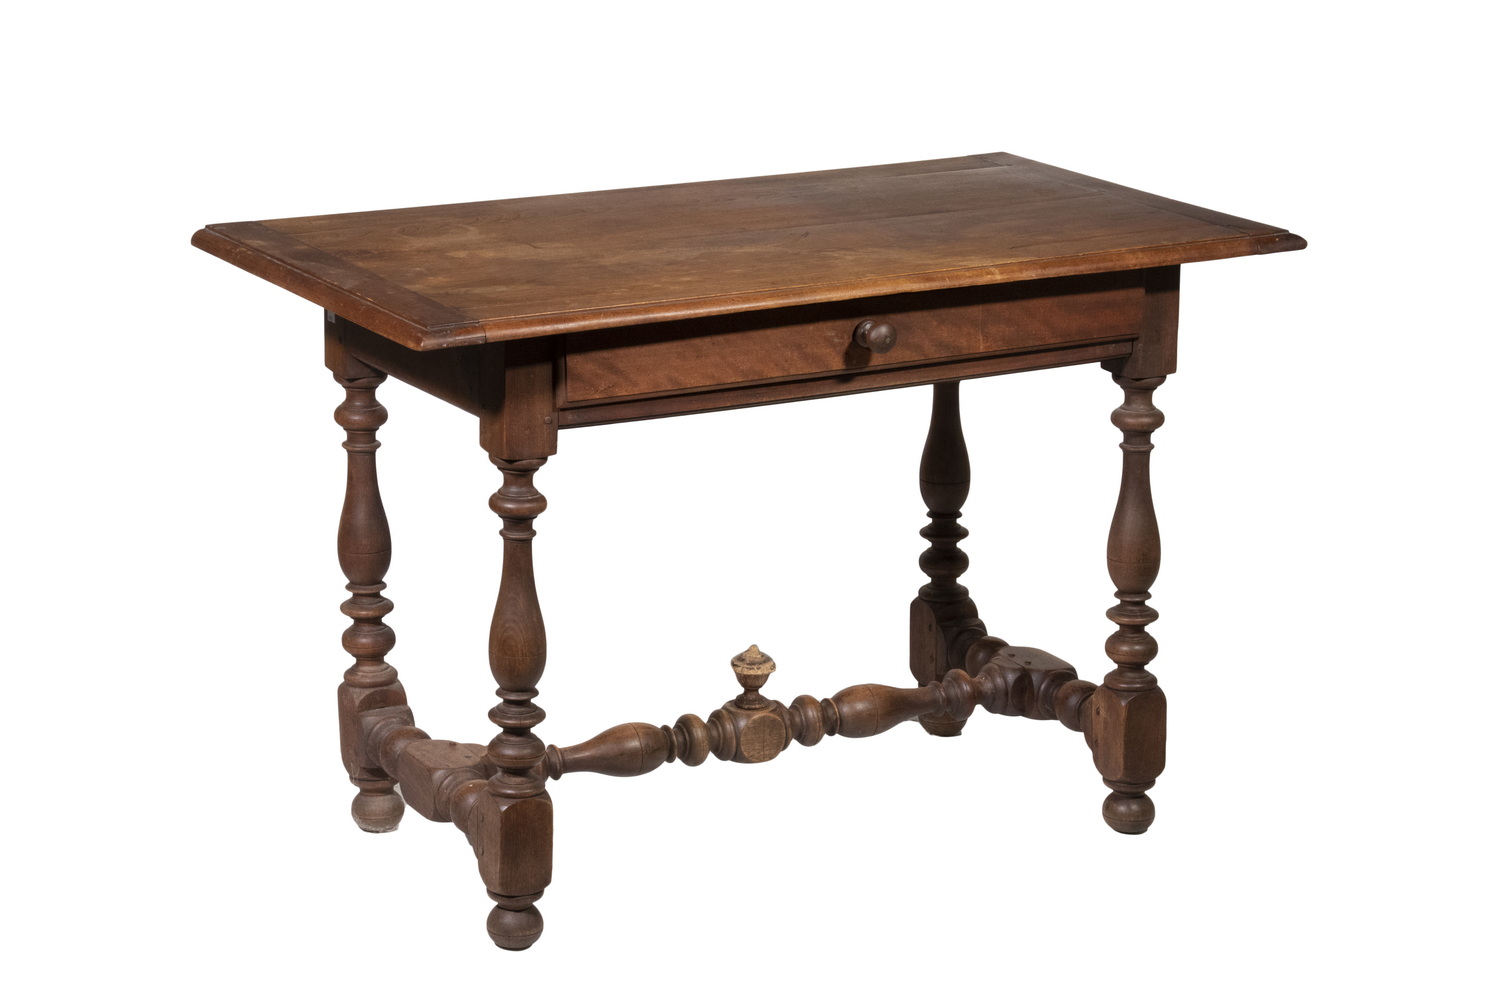 EARLY FRENCH CANADIAN TAVERN TABLE